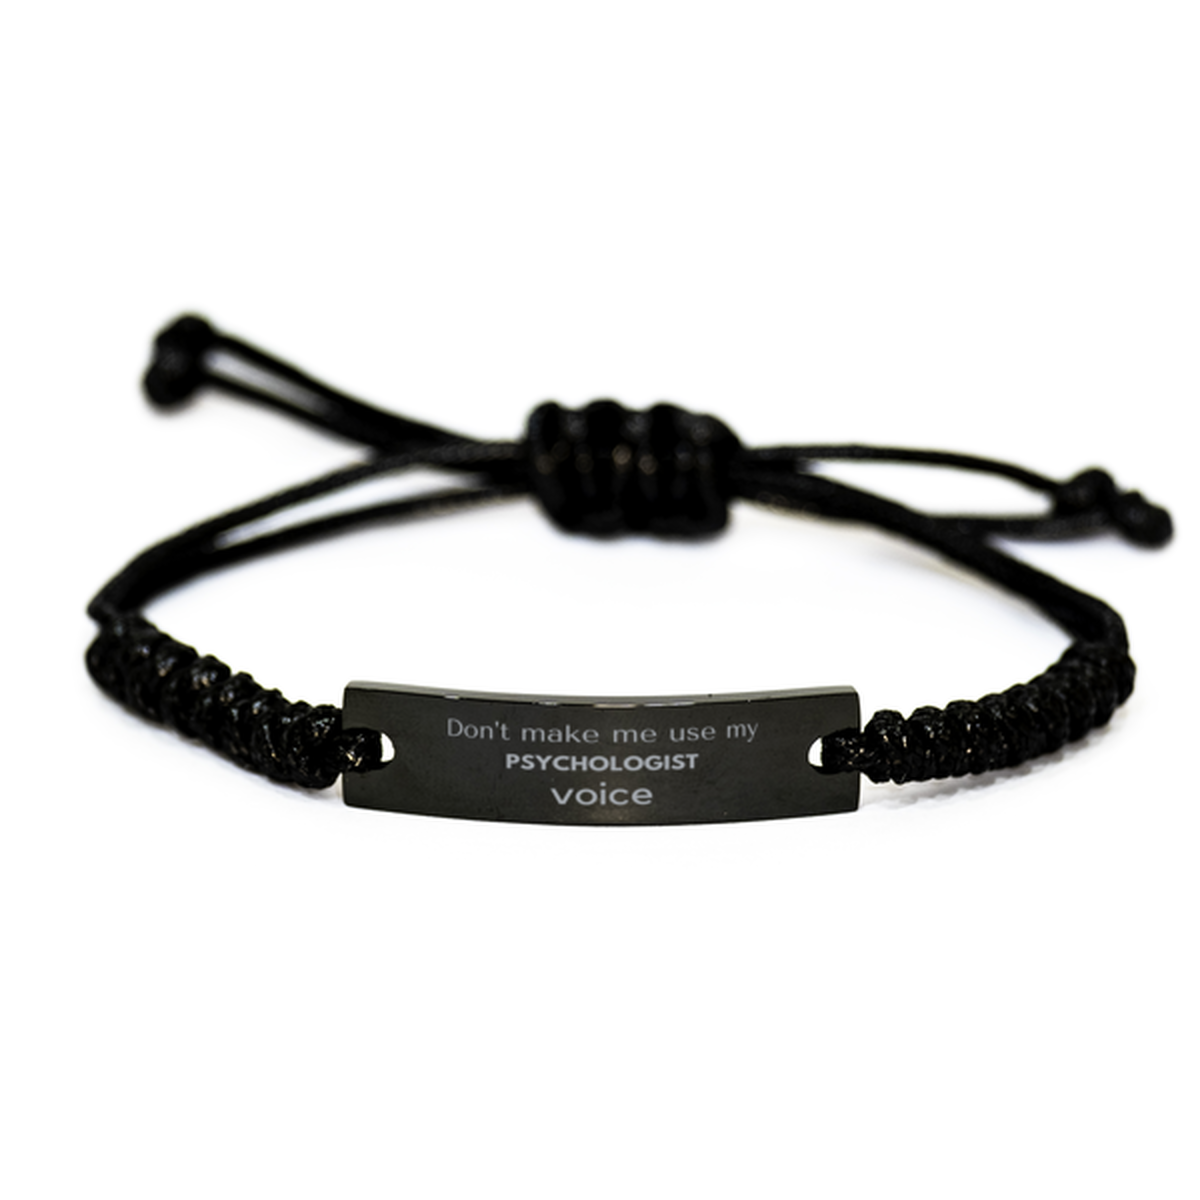 Don't make me use my Psychologist voice, Sarcasm Psychologist Gifts, Christmas Psychologist Black Rope Bracelet Birthday Unique Gifts For Psychologist Coworkers, Men, Women, Colleague, Friends